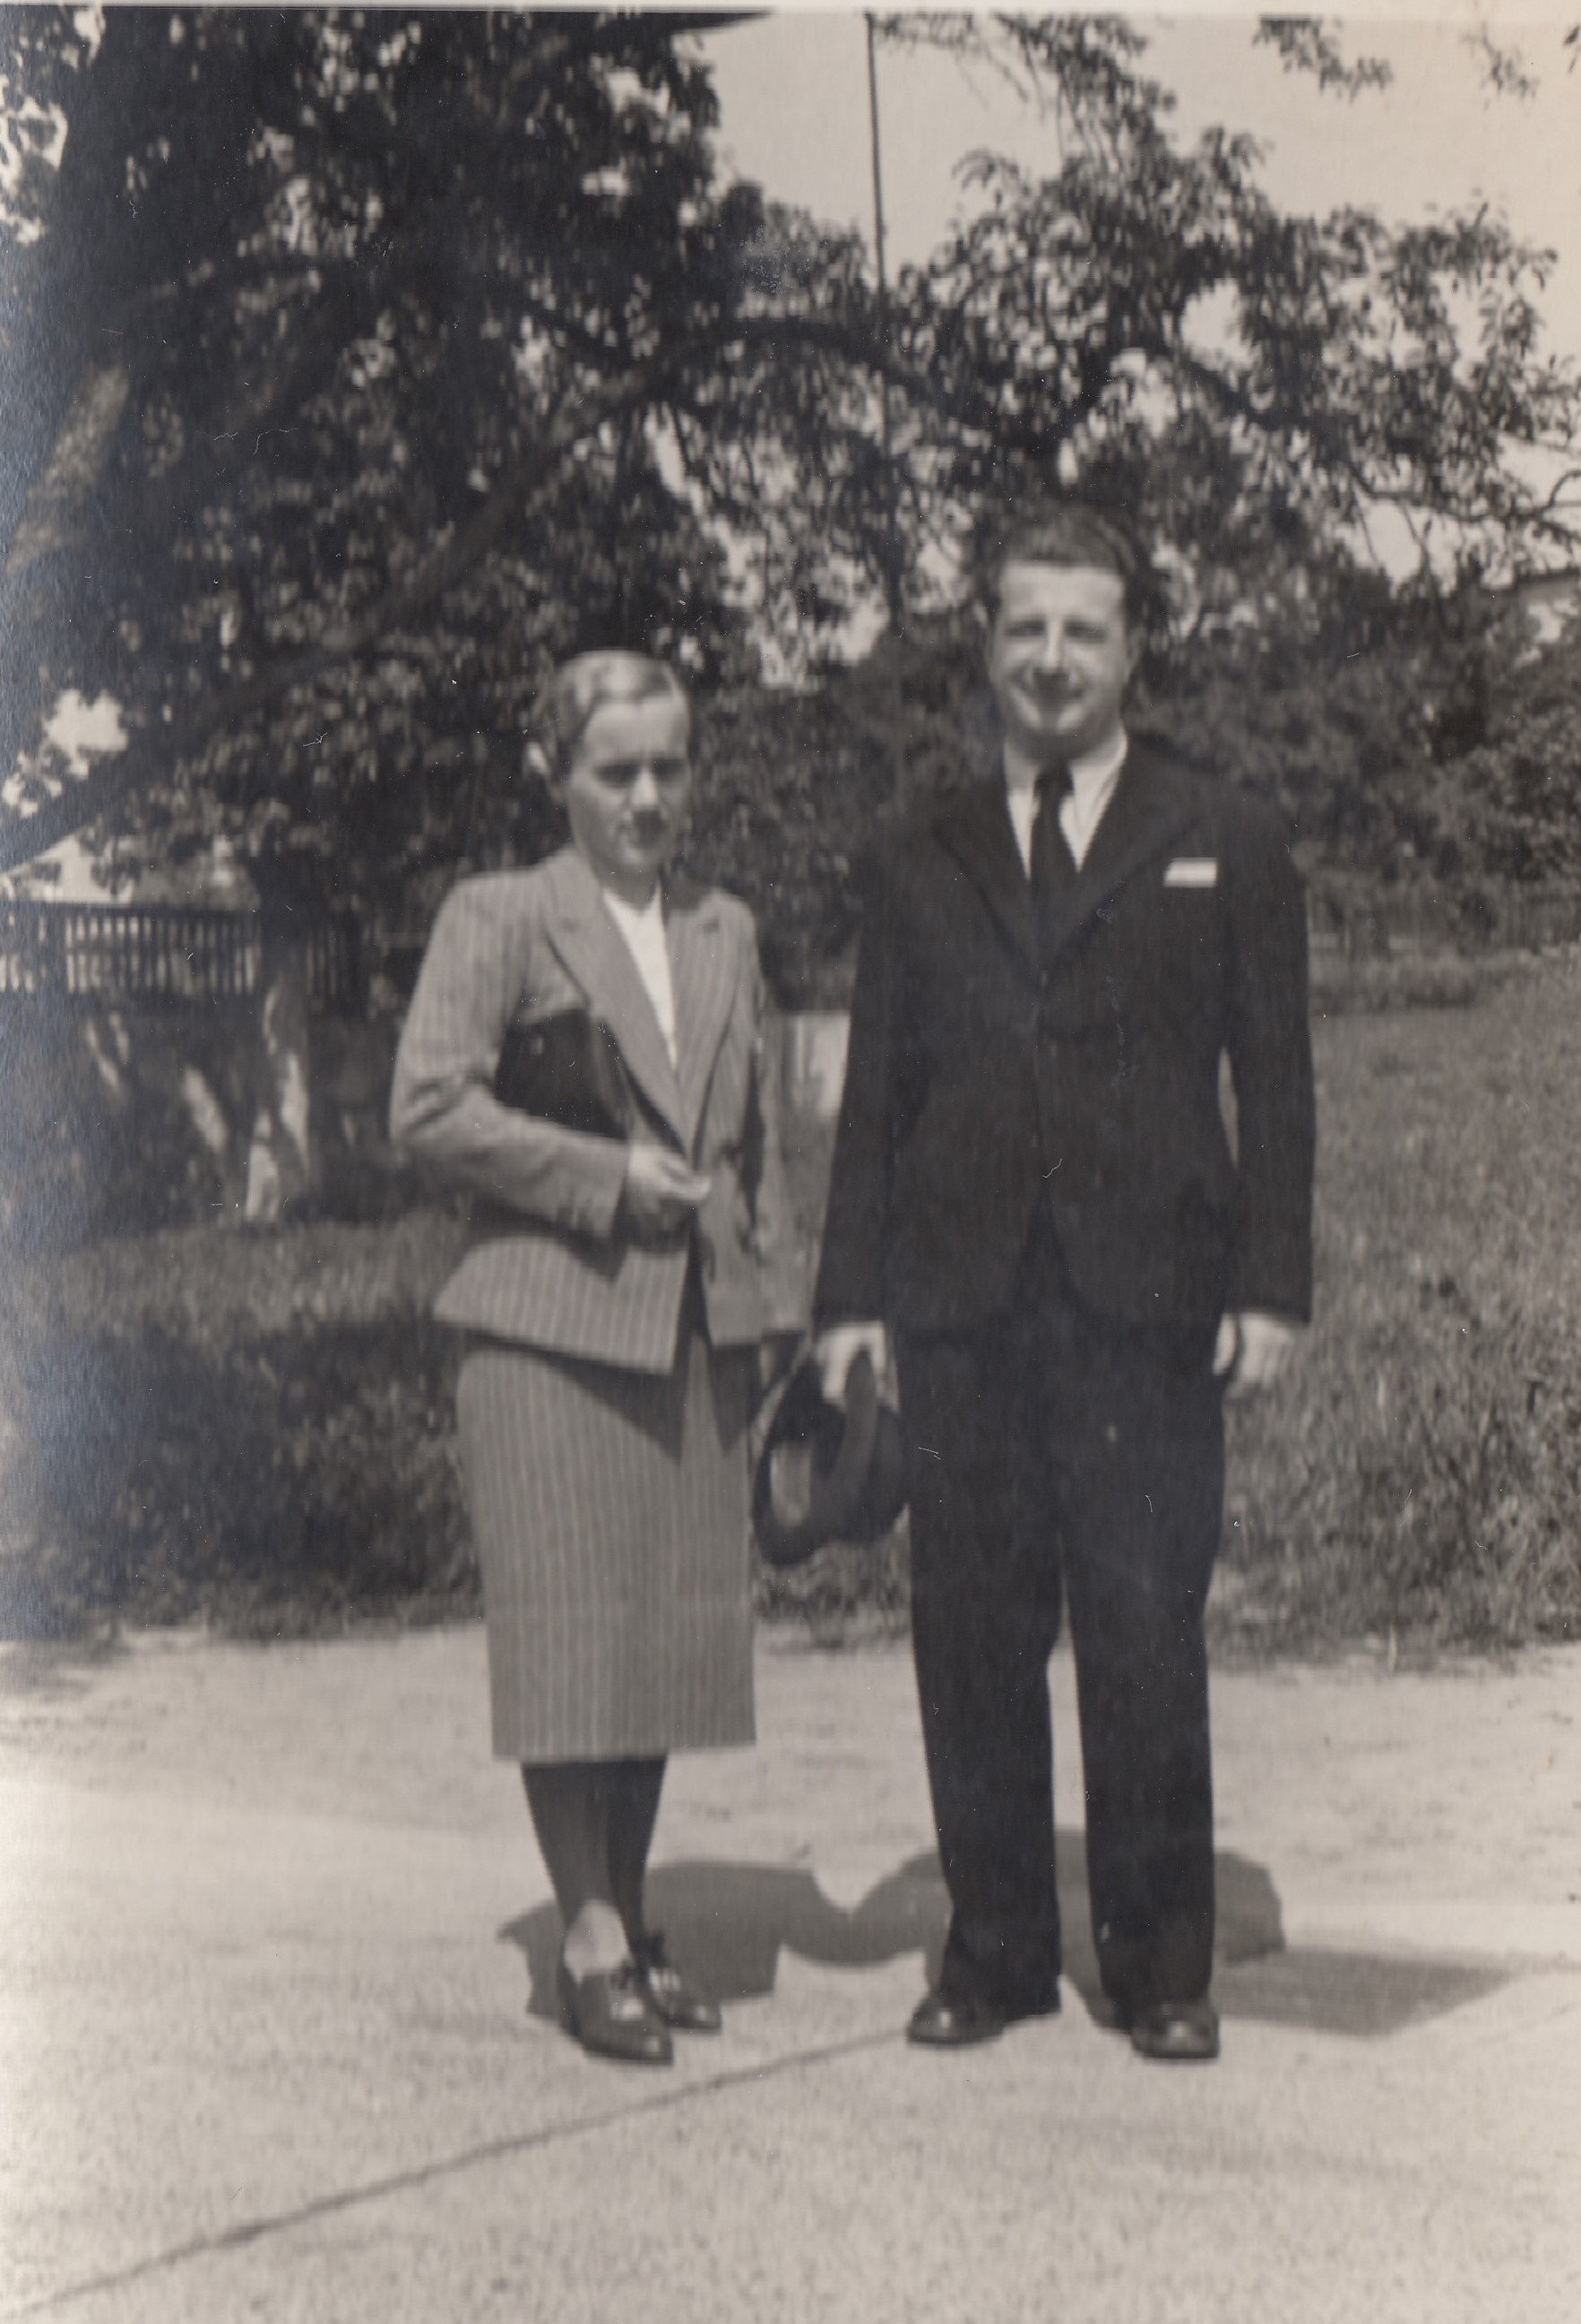 Father and mother of Eva Gärtnerová - Oto and Erika Singer in Ústí nad Labem. The film dates from the mid-1930s